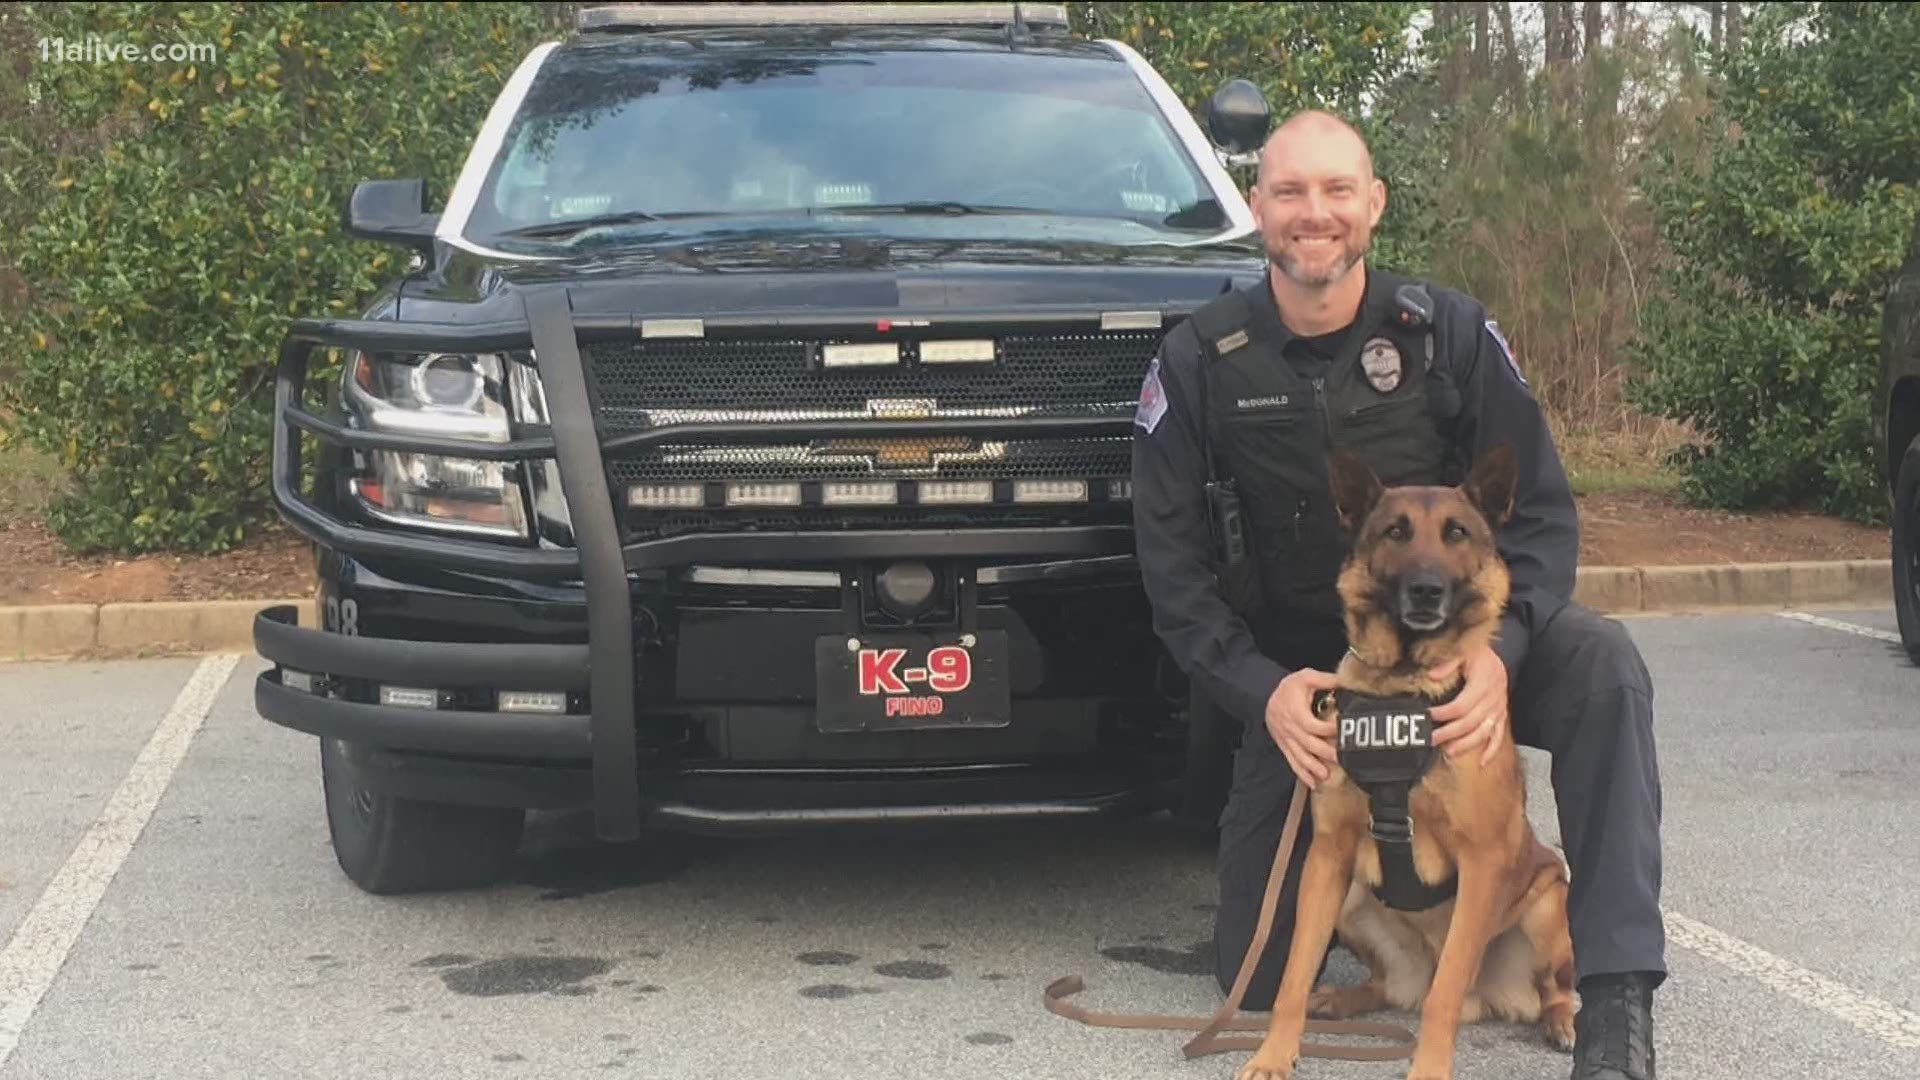 The Douglasville Police Department expressed their gratitude for K-9 officer Fino's work in a heartfelt Facebook post on Monday.